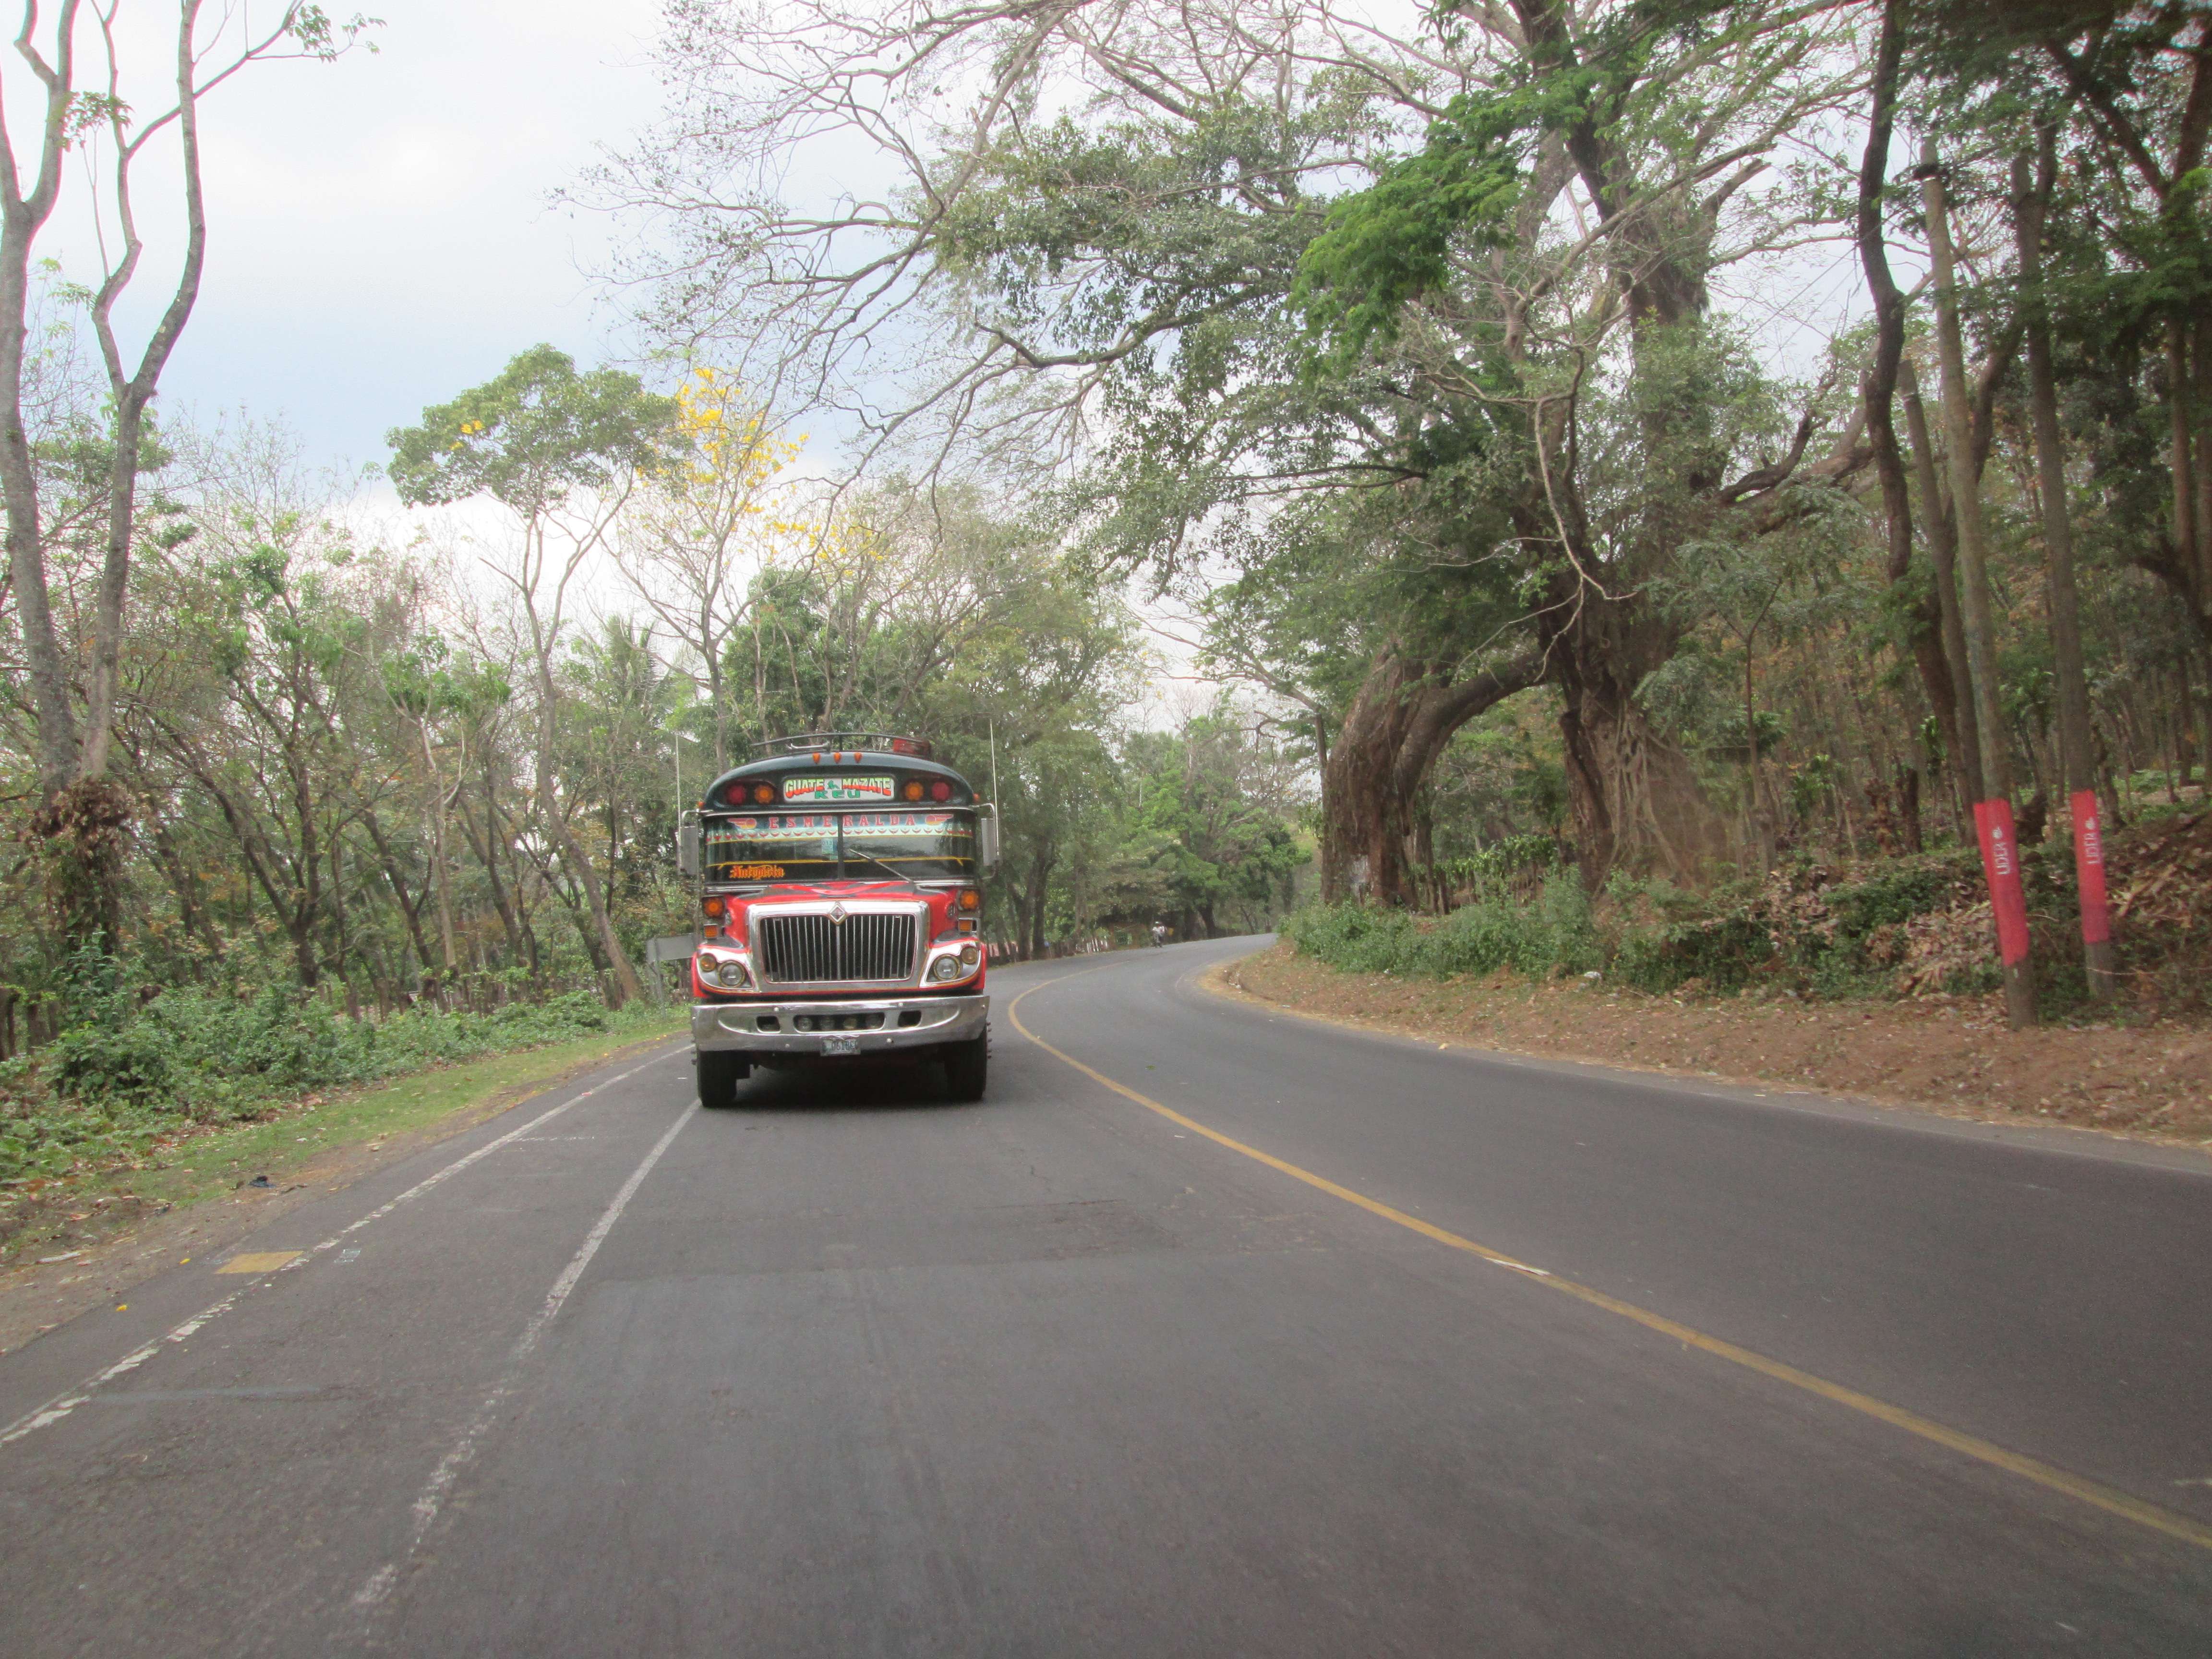 A photo of a colorful bus on a jungle road